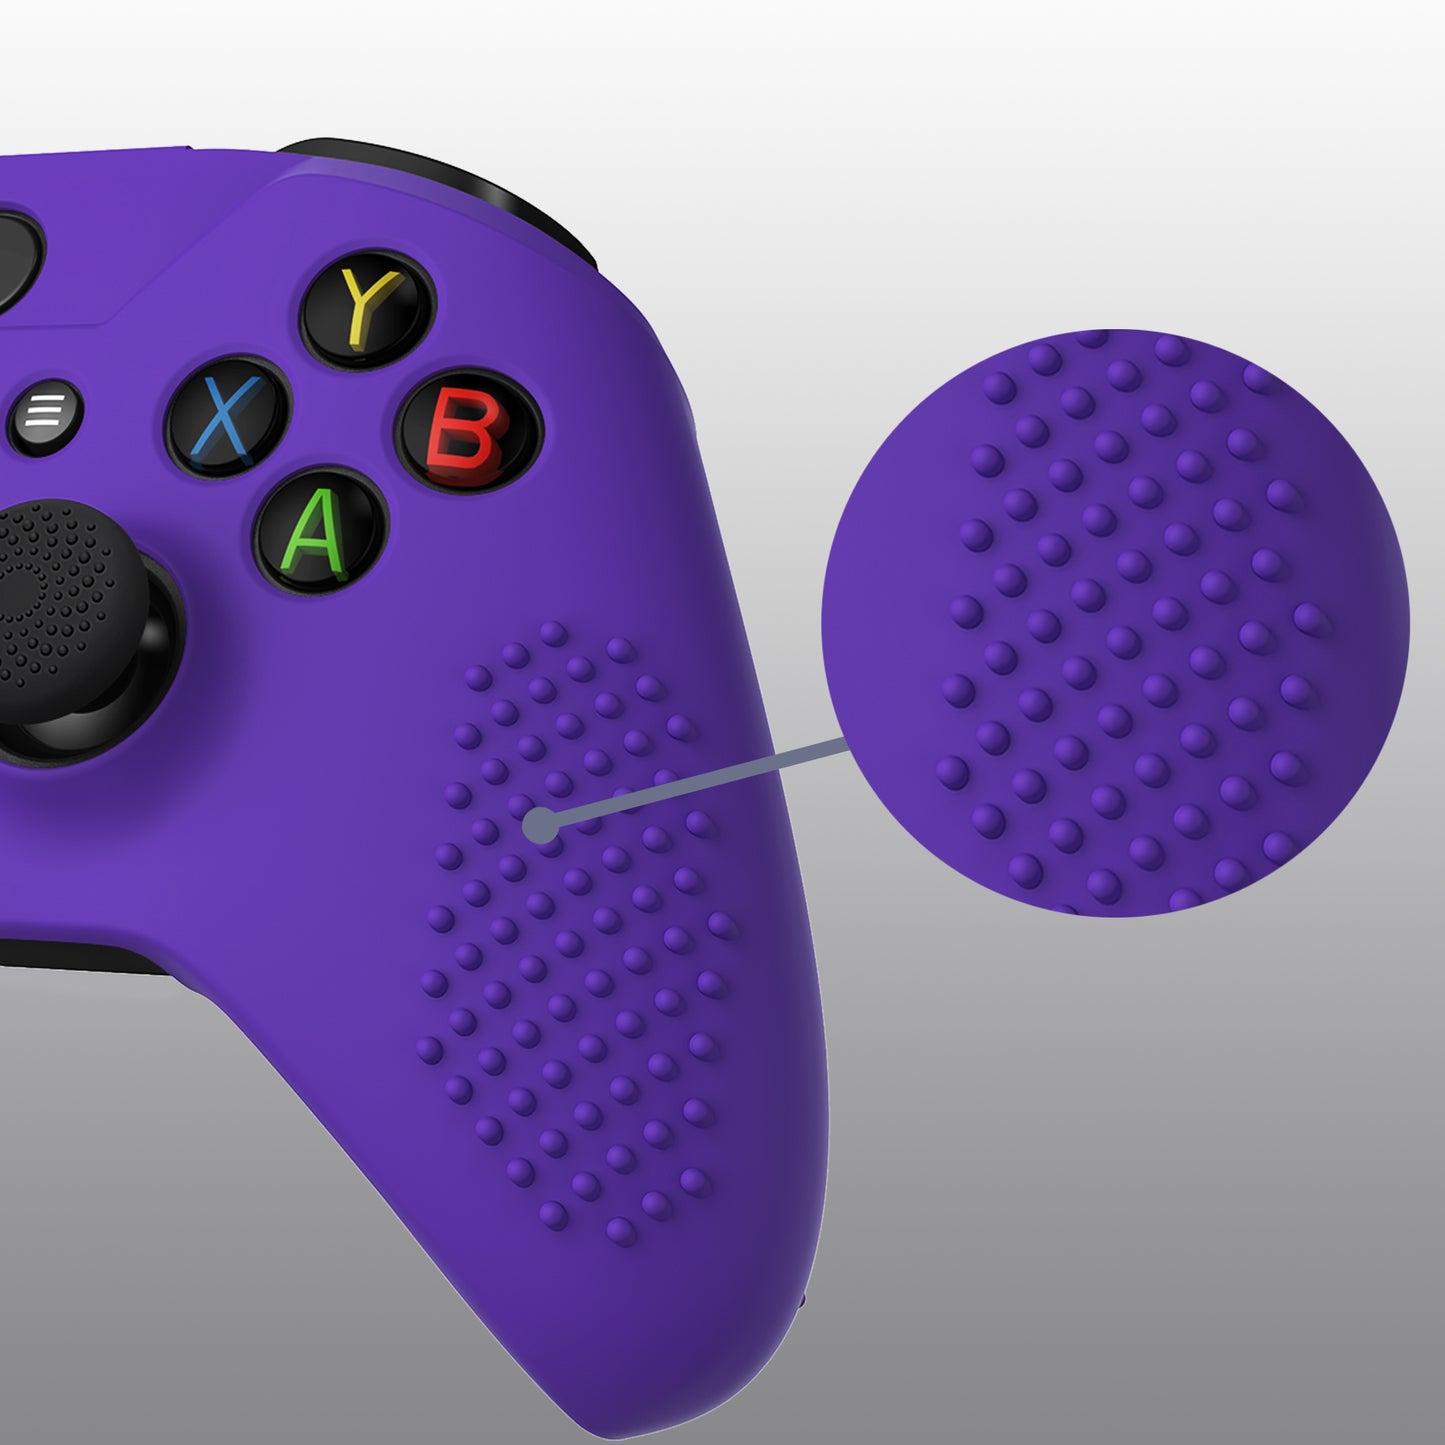 eXtremeRate PlayVital Protective Anti-Slip Silicone Case with Thumb Grips Caps for Xbox One X & S Controller - Purple eXtremeRate